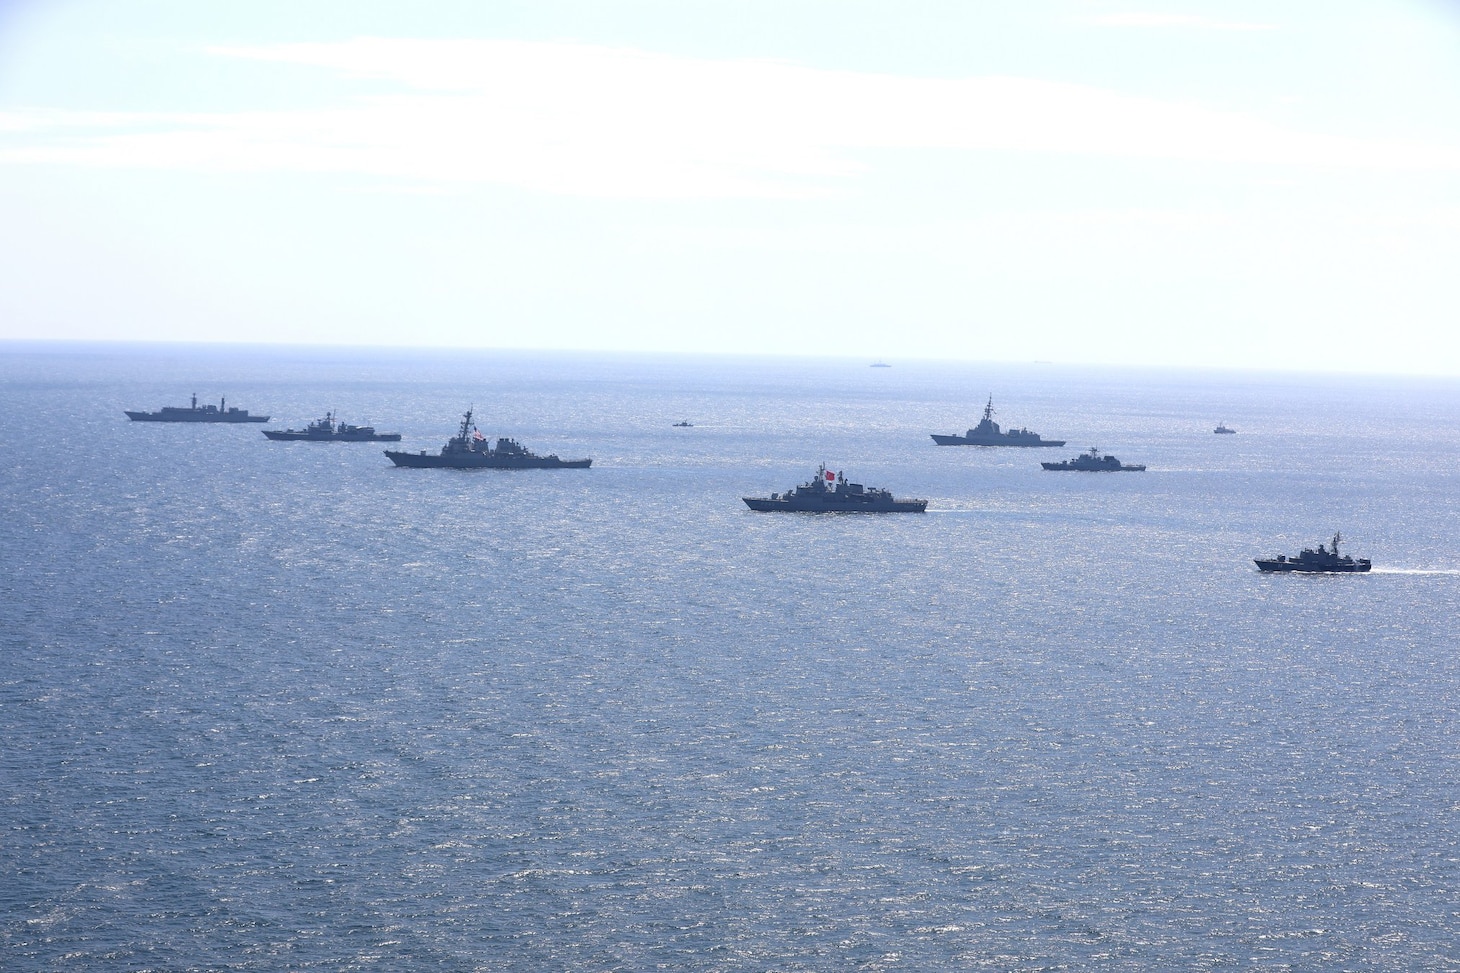 200724-O-NO901-0002  BLACK SEA (July 24, 2020) Ships and aircraft from eight nations sail in formation during a photo exercise while participating in exercise Sea Breeze 2020 in the Black Sea, July 24, 2020. Sea Breeze is an annual U.S.-Ukrainian co-hosted exercise designed to enhance interoperability between participating nations and strengthen regional security. (Photo courtesy of Ukraine Navy)